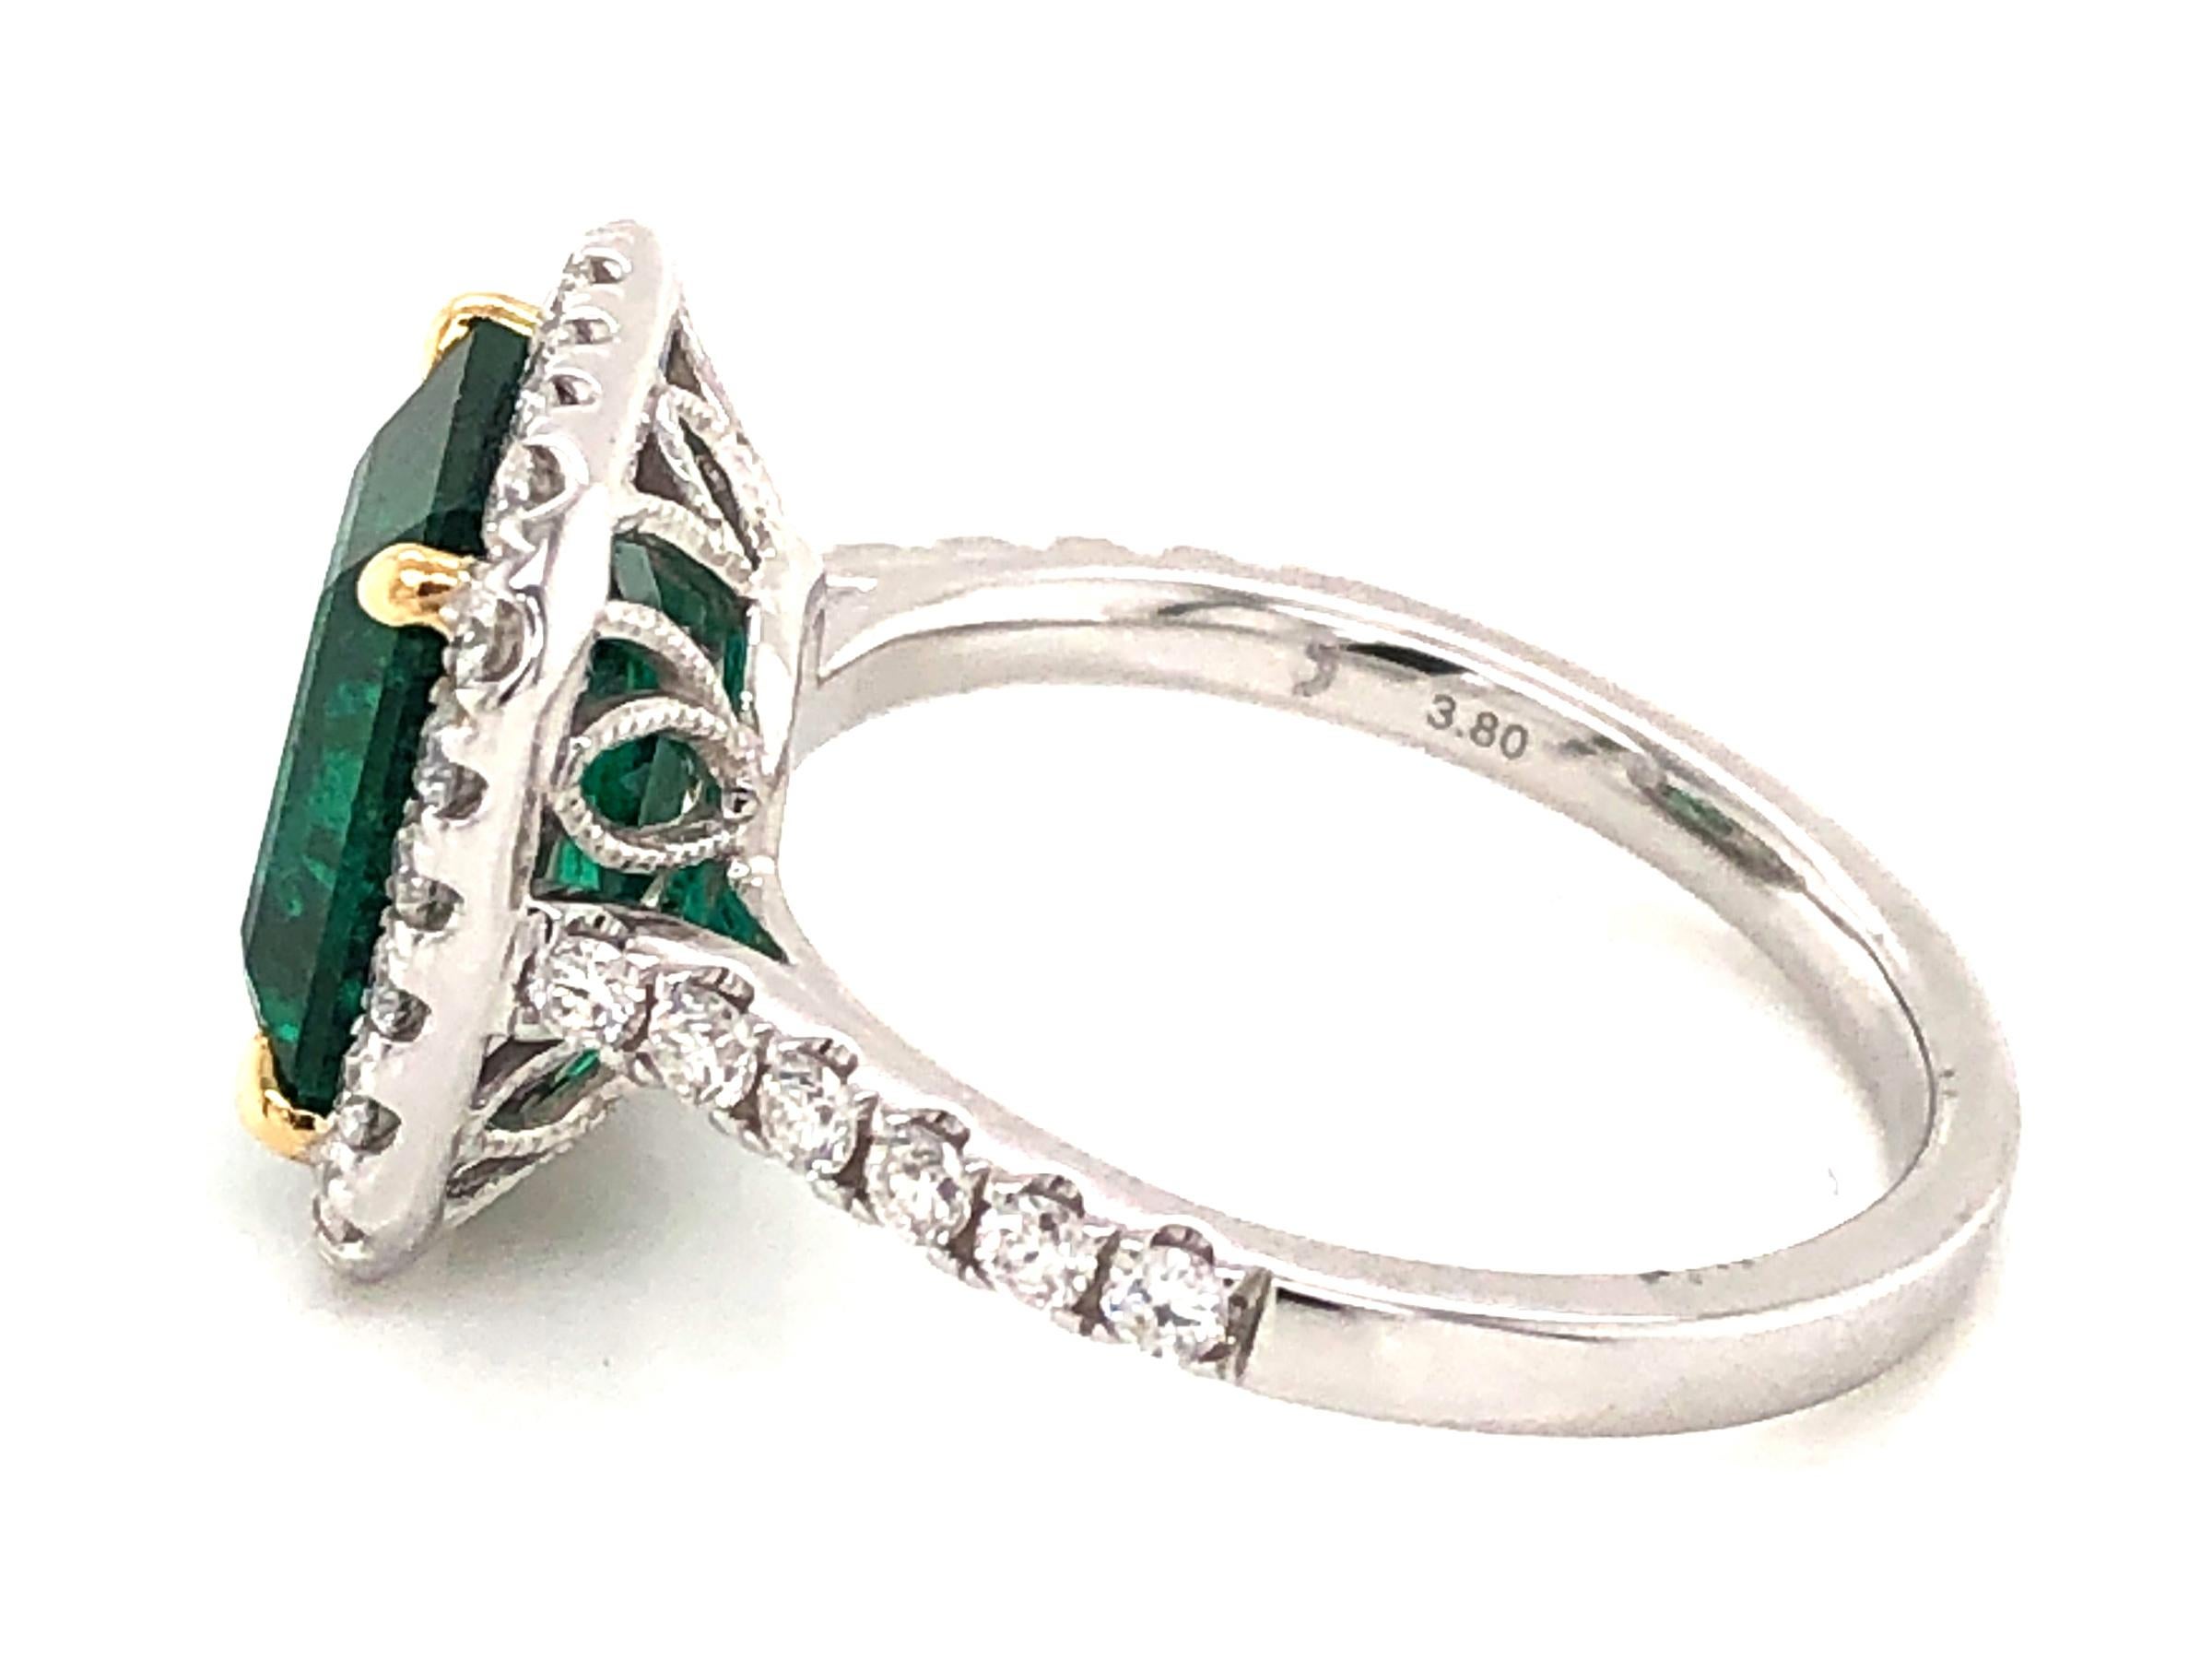 GIA Certified 3.80 Carat Emerald and Diamond Ring For Sale at 1stDibs